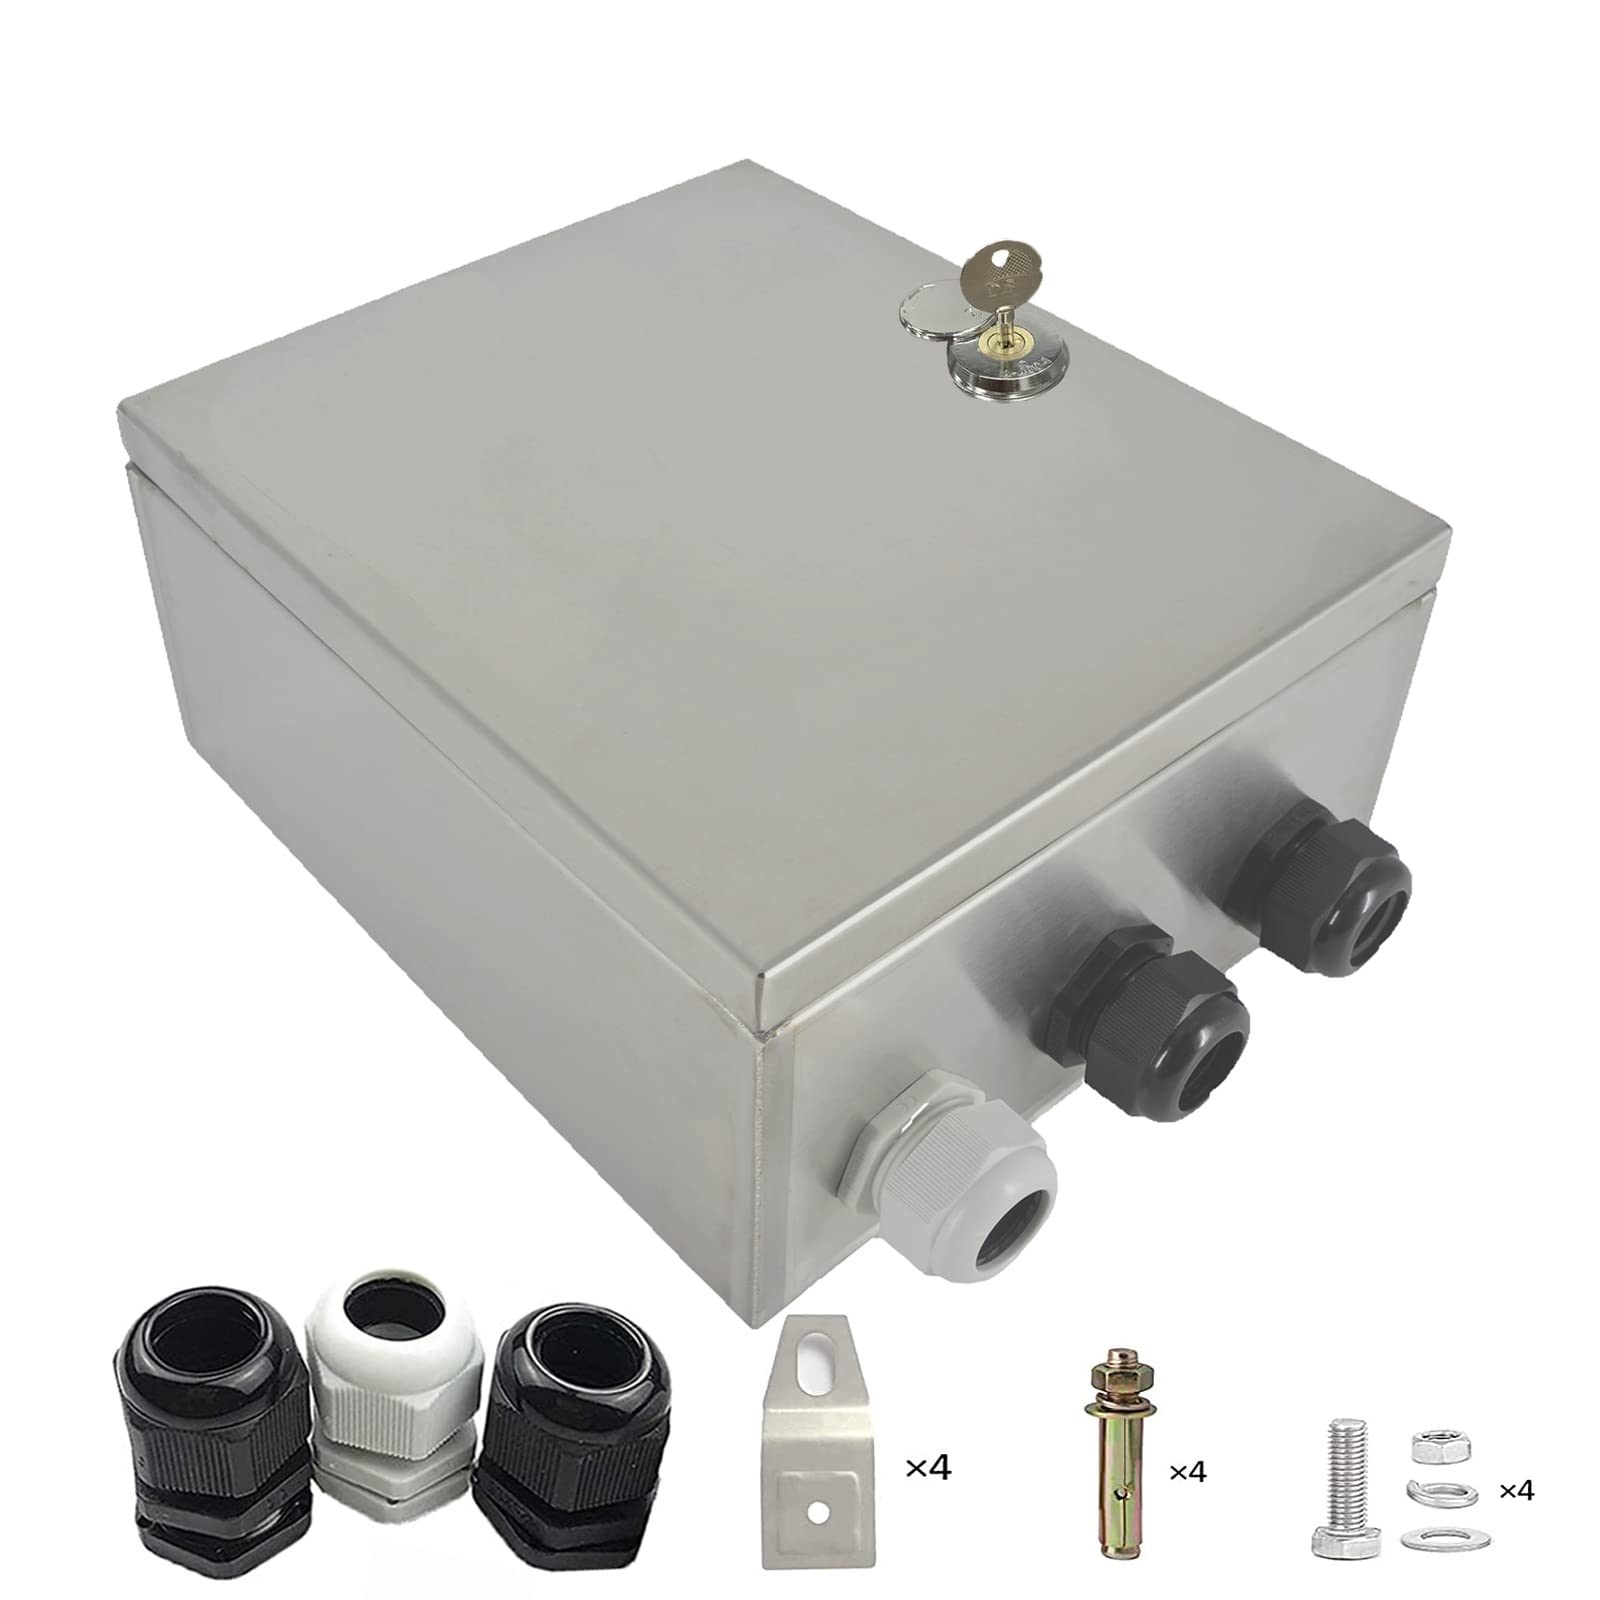 Stainless Steel Electrical Box Indoor/Outdoor Wall-Mounted Junction Box Anti-Rust Engineering Box with Lock 11.8" H x 9.8" W x 5.5" Bui...